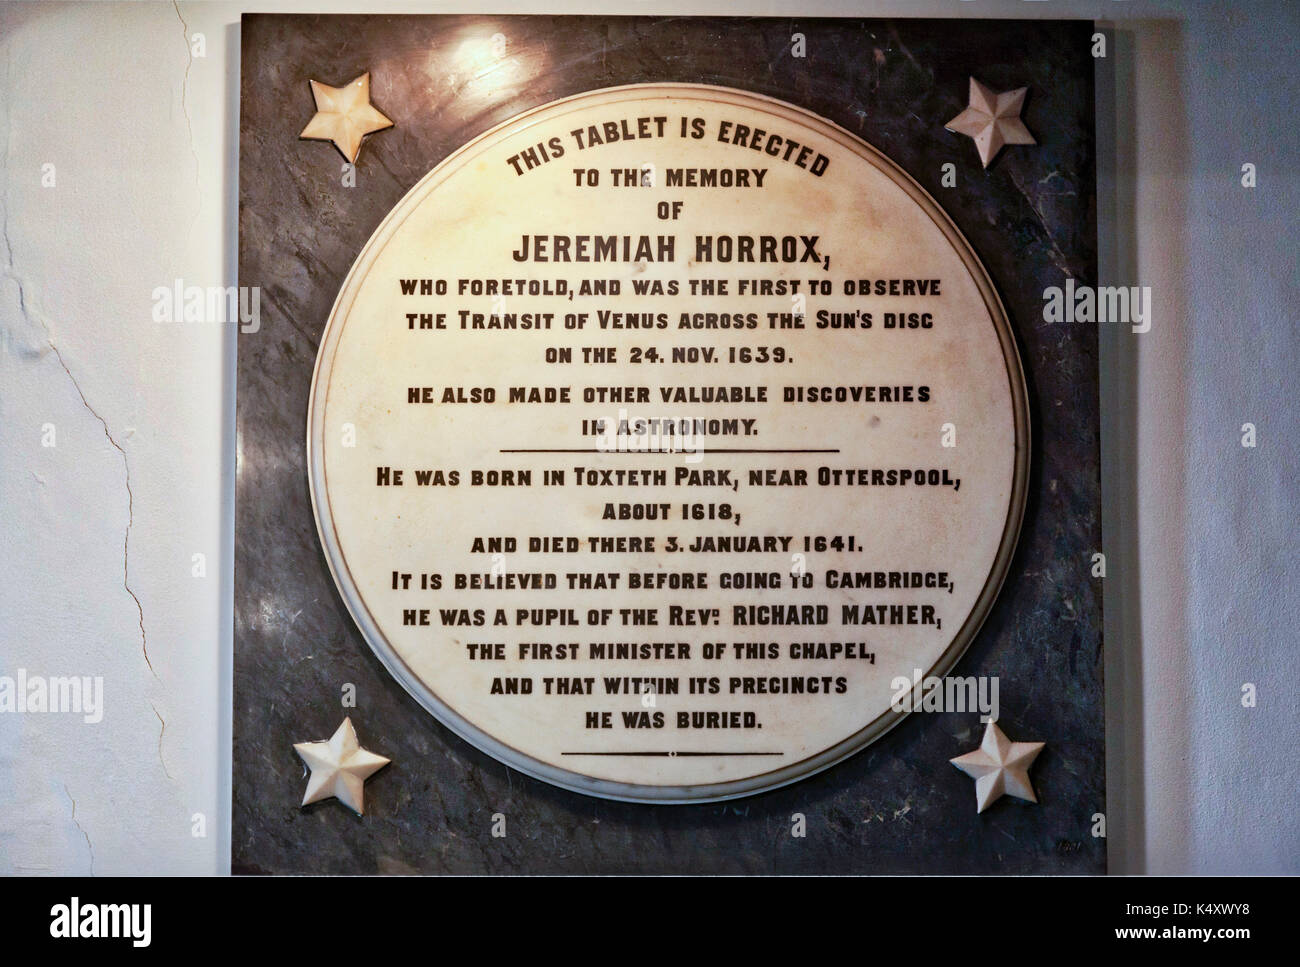 Jeremiah Horrocks memorial tablet inside the Ancient Chapel of Toxteth, Liverpool. Horrocks (or Horrox), first in world to observe transit of Venus. Stock Photo